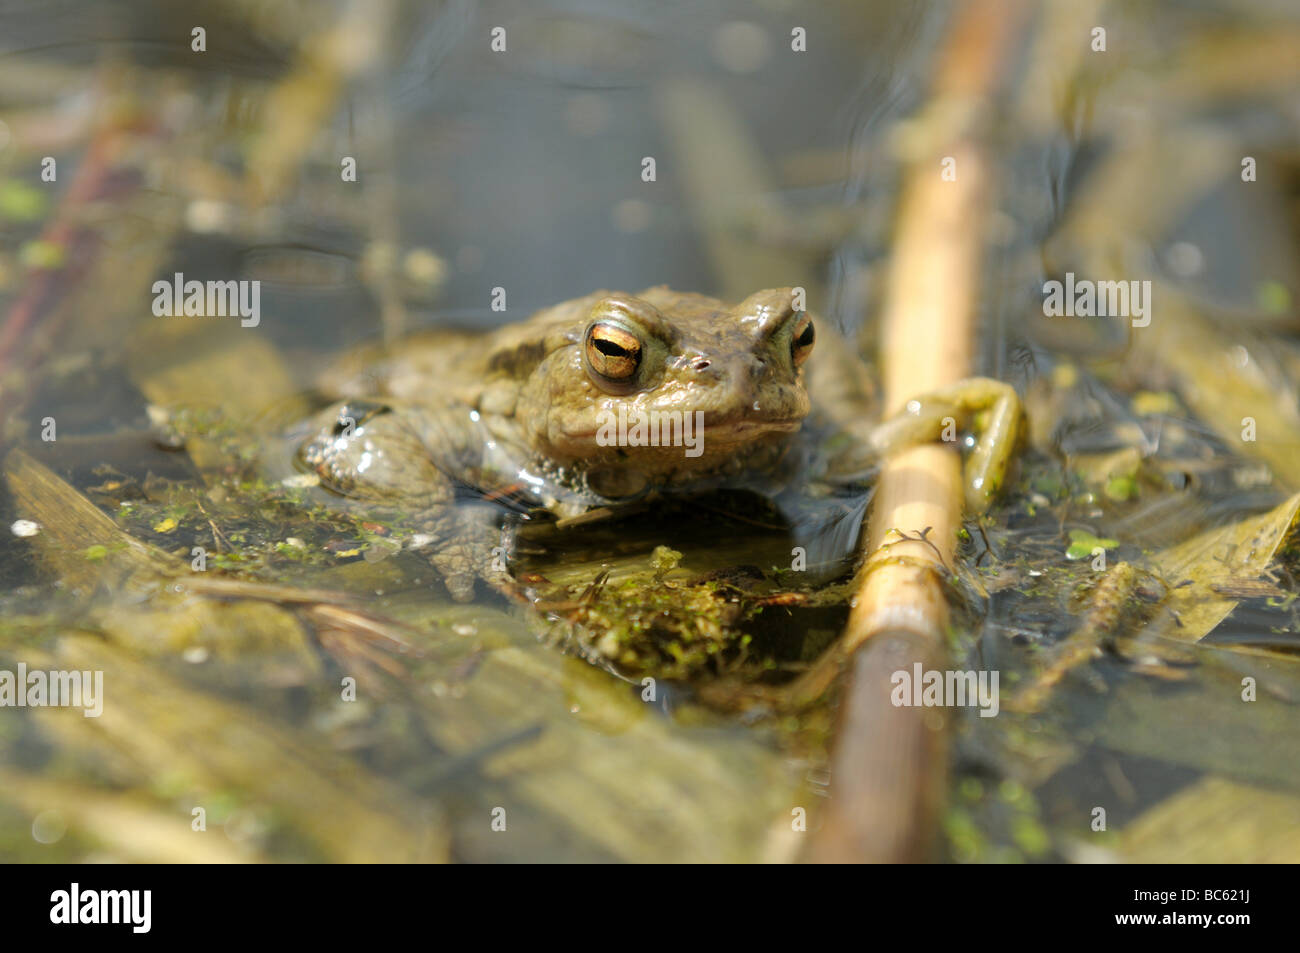 Close-up of African Common Toad (Amietophrynus gutturalis) in water, Altmuehlsee, Franconia, Bavaria, Germany Stock Photo